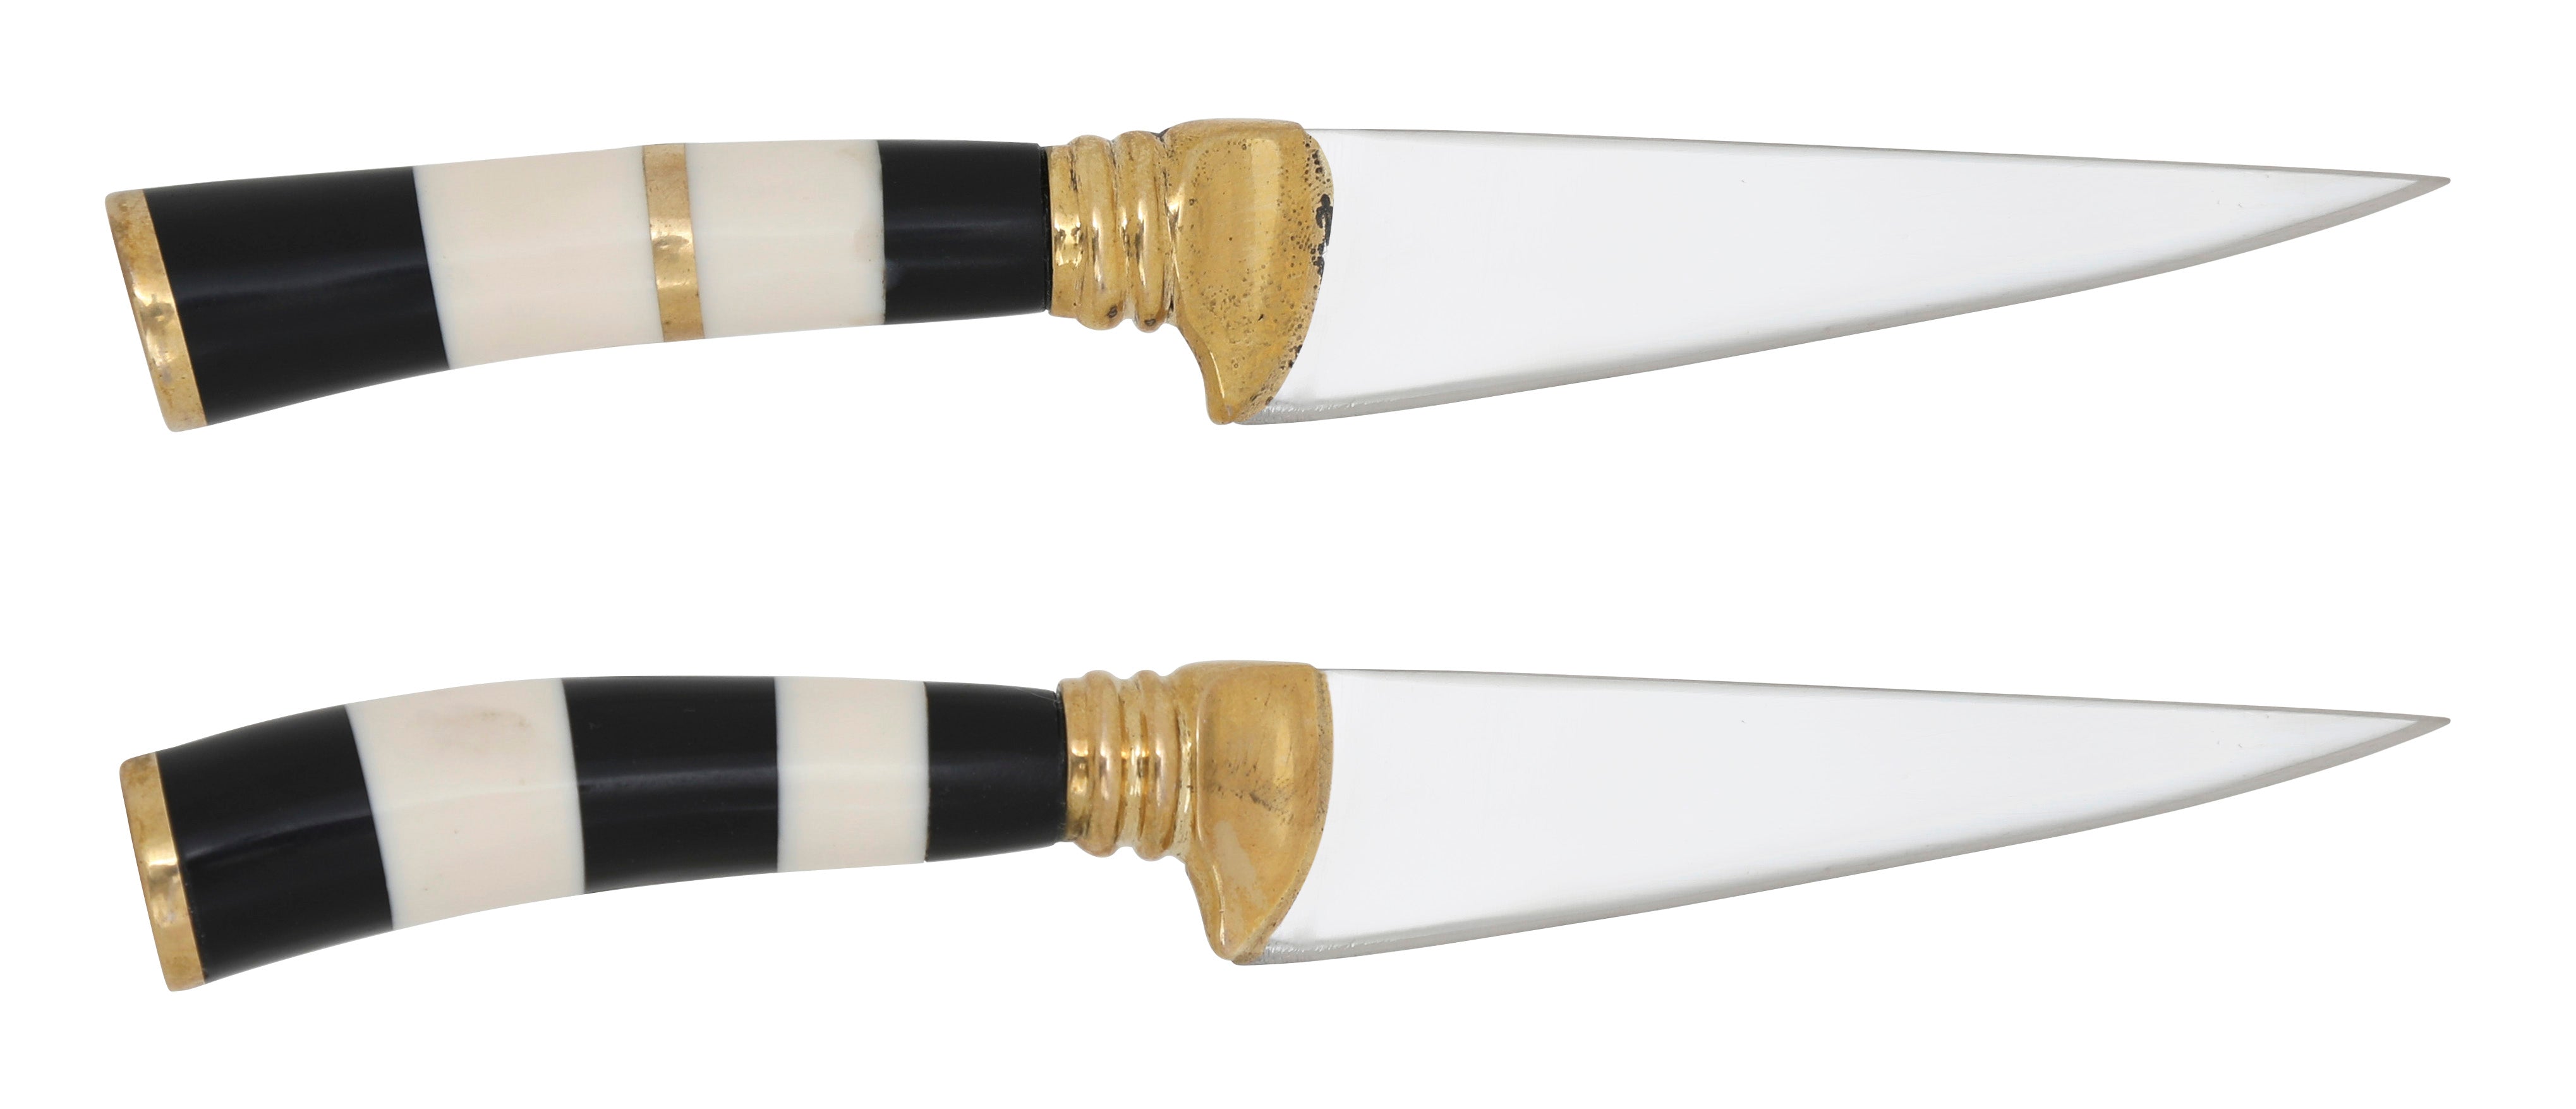 Matte Finish Cheese Knife – Indy Home